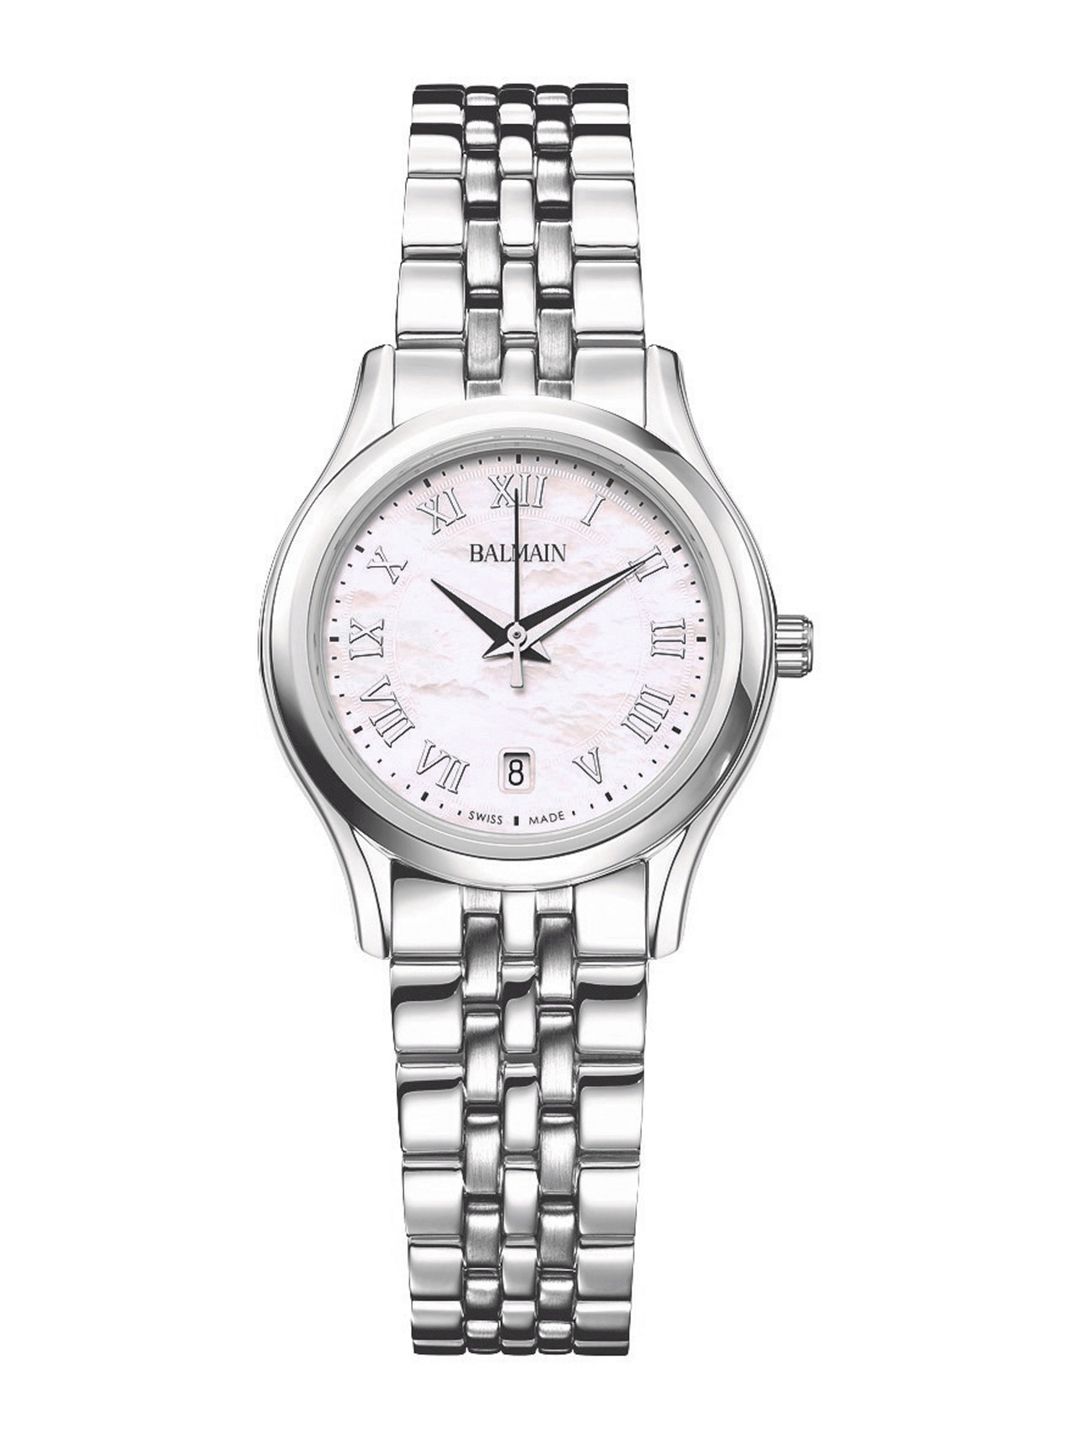 Balmain BELEGANZA LADY II Women Off-White Swiss Made Mother of Pearl Analogue Watch B83413382 Price in India